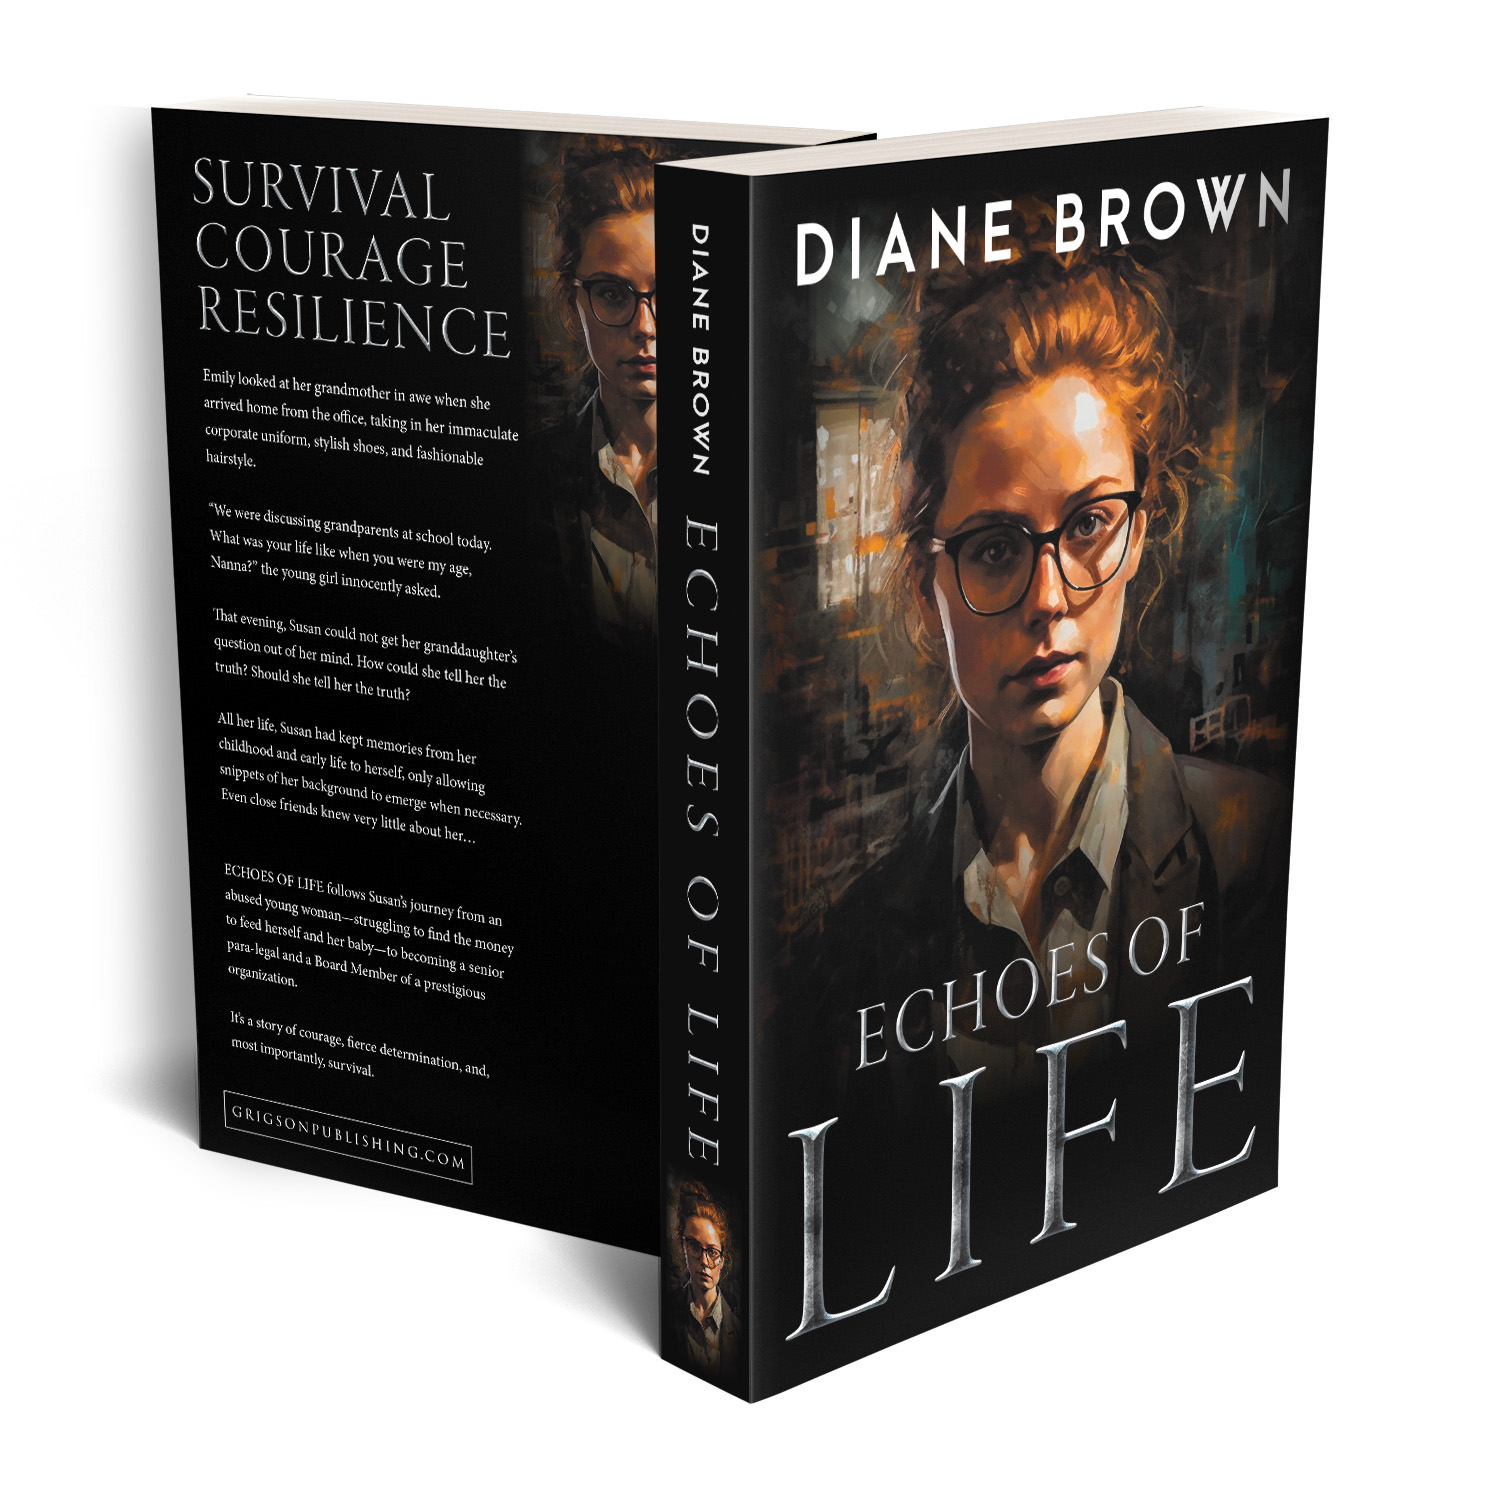 'Echoes of Life' is a deep and revealing character-based novel. The author is Diane Brown. The cover design and and interior formatting are by Mark Thomas of coverness.com. To find out more about my book design services, please visit www.coverness.com.